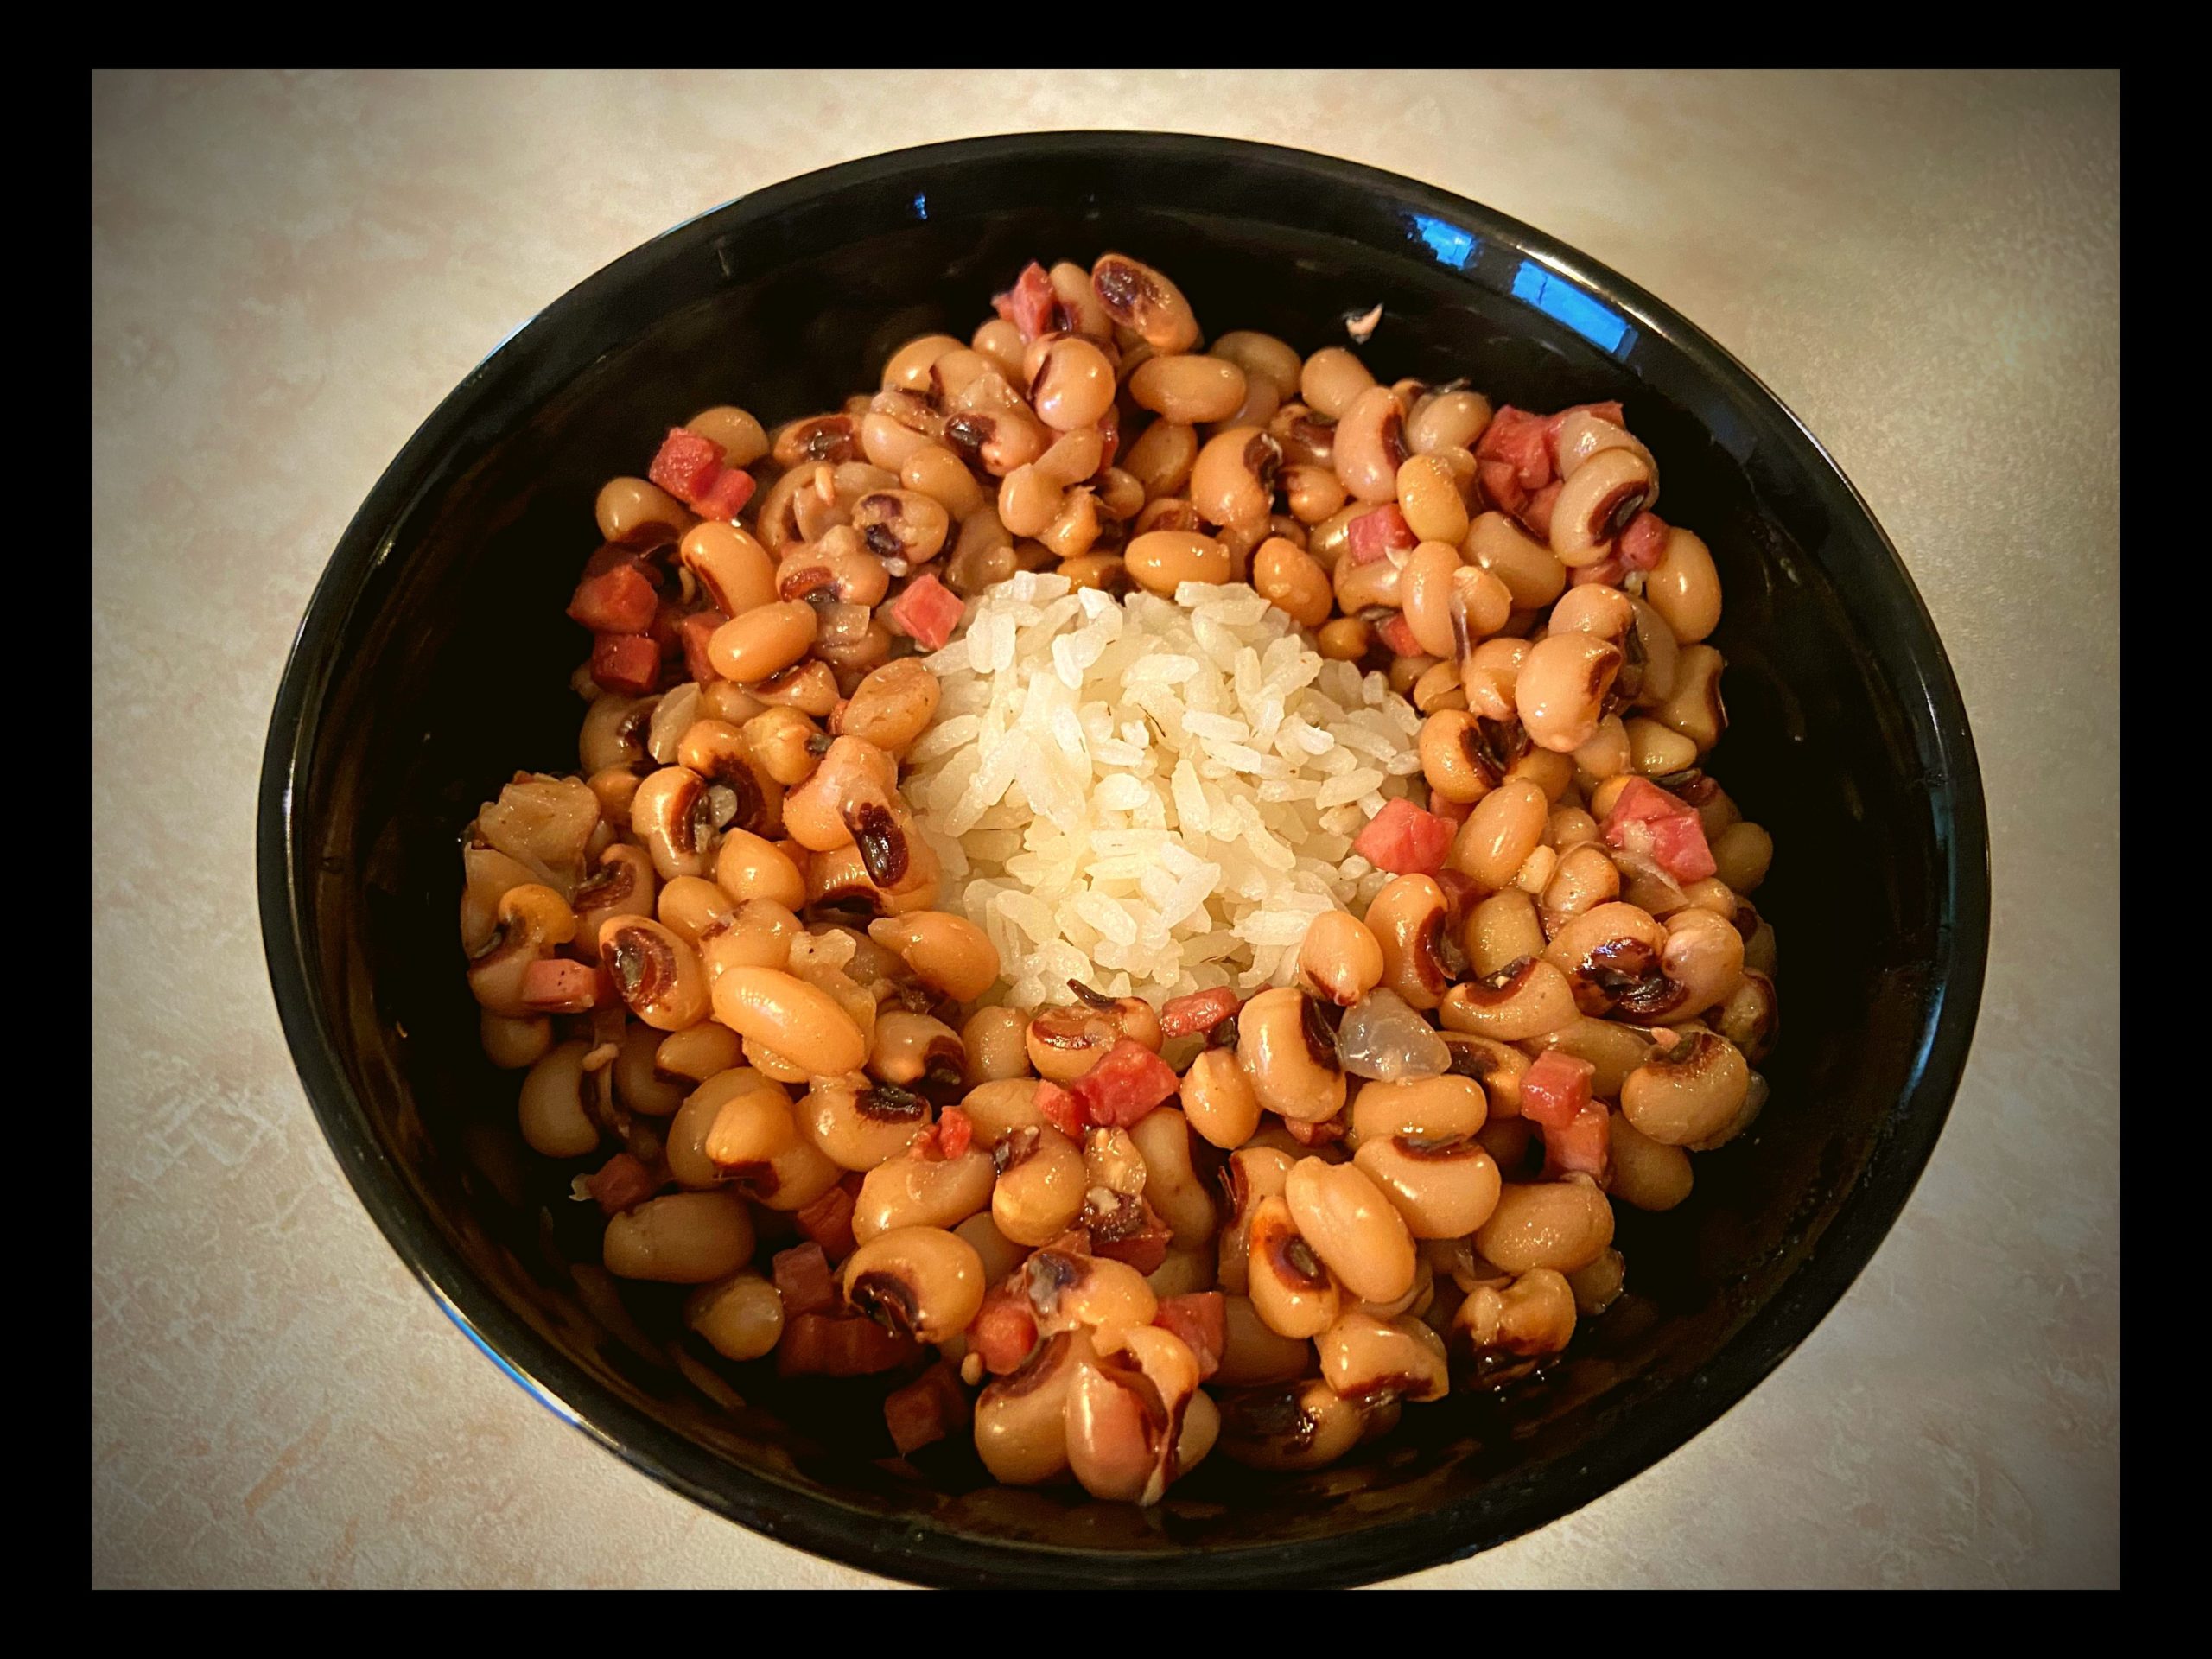 A black bowl filled with a scoop of white rice in the middle surrounded by black eyed peas and ham sitting on a counter top.